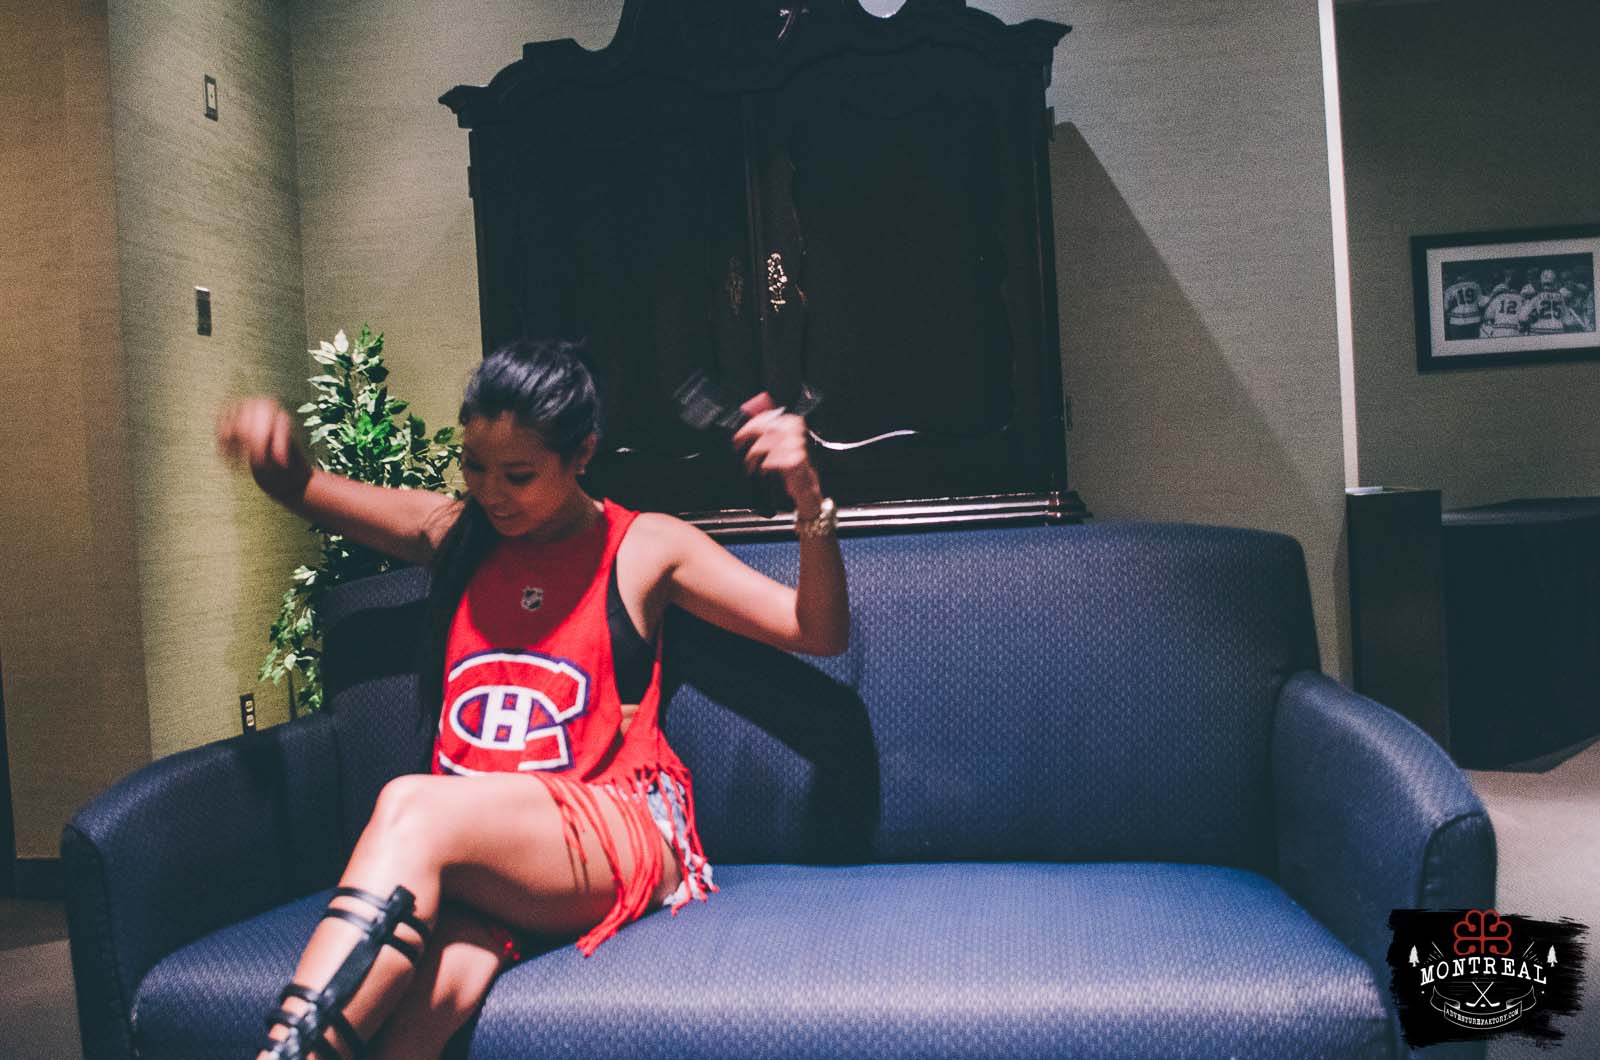 Thuymi getting excited to sit again on that chair after 9 years. This is Jean Beliveau's sofa when he would go to the Alumni's room. JB is also a Habs Legend.